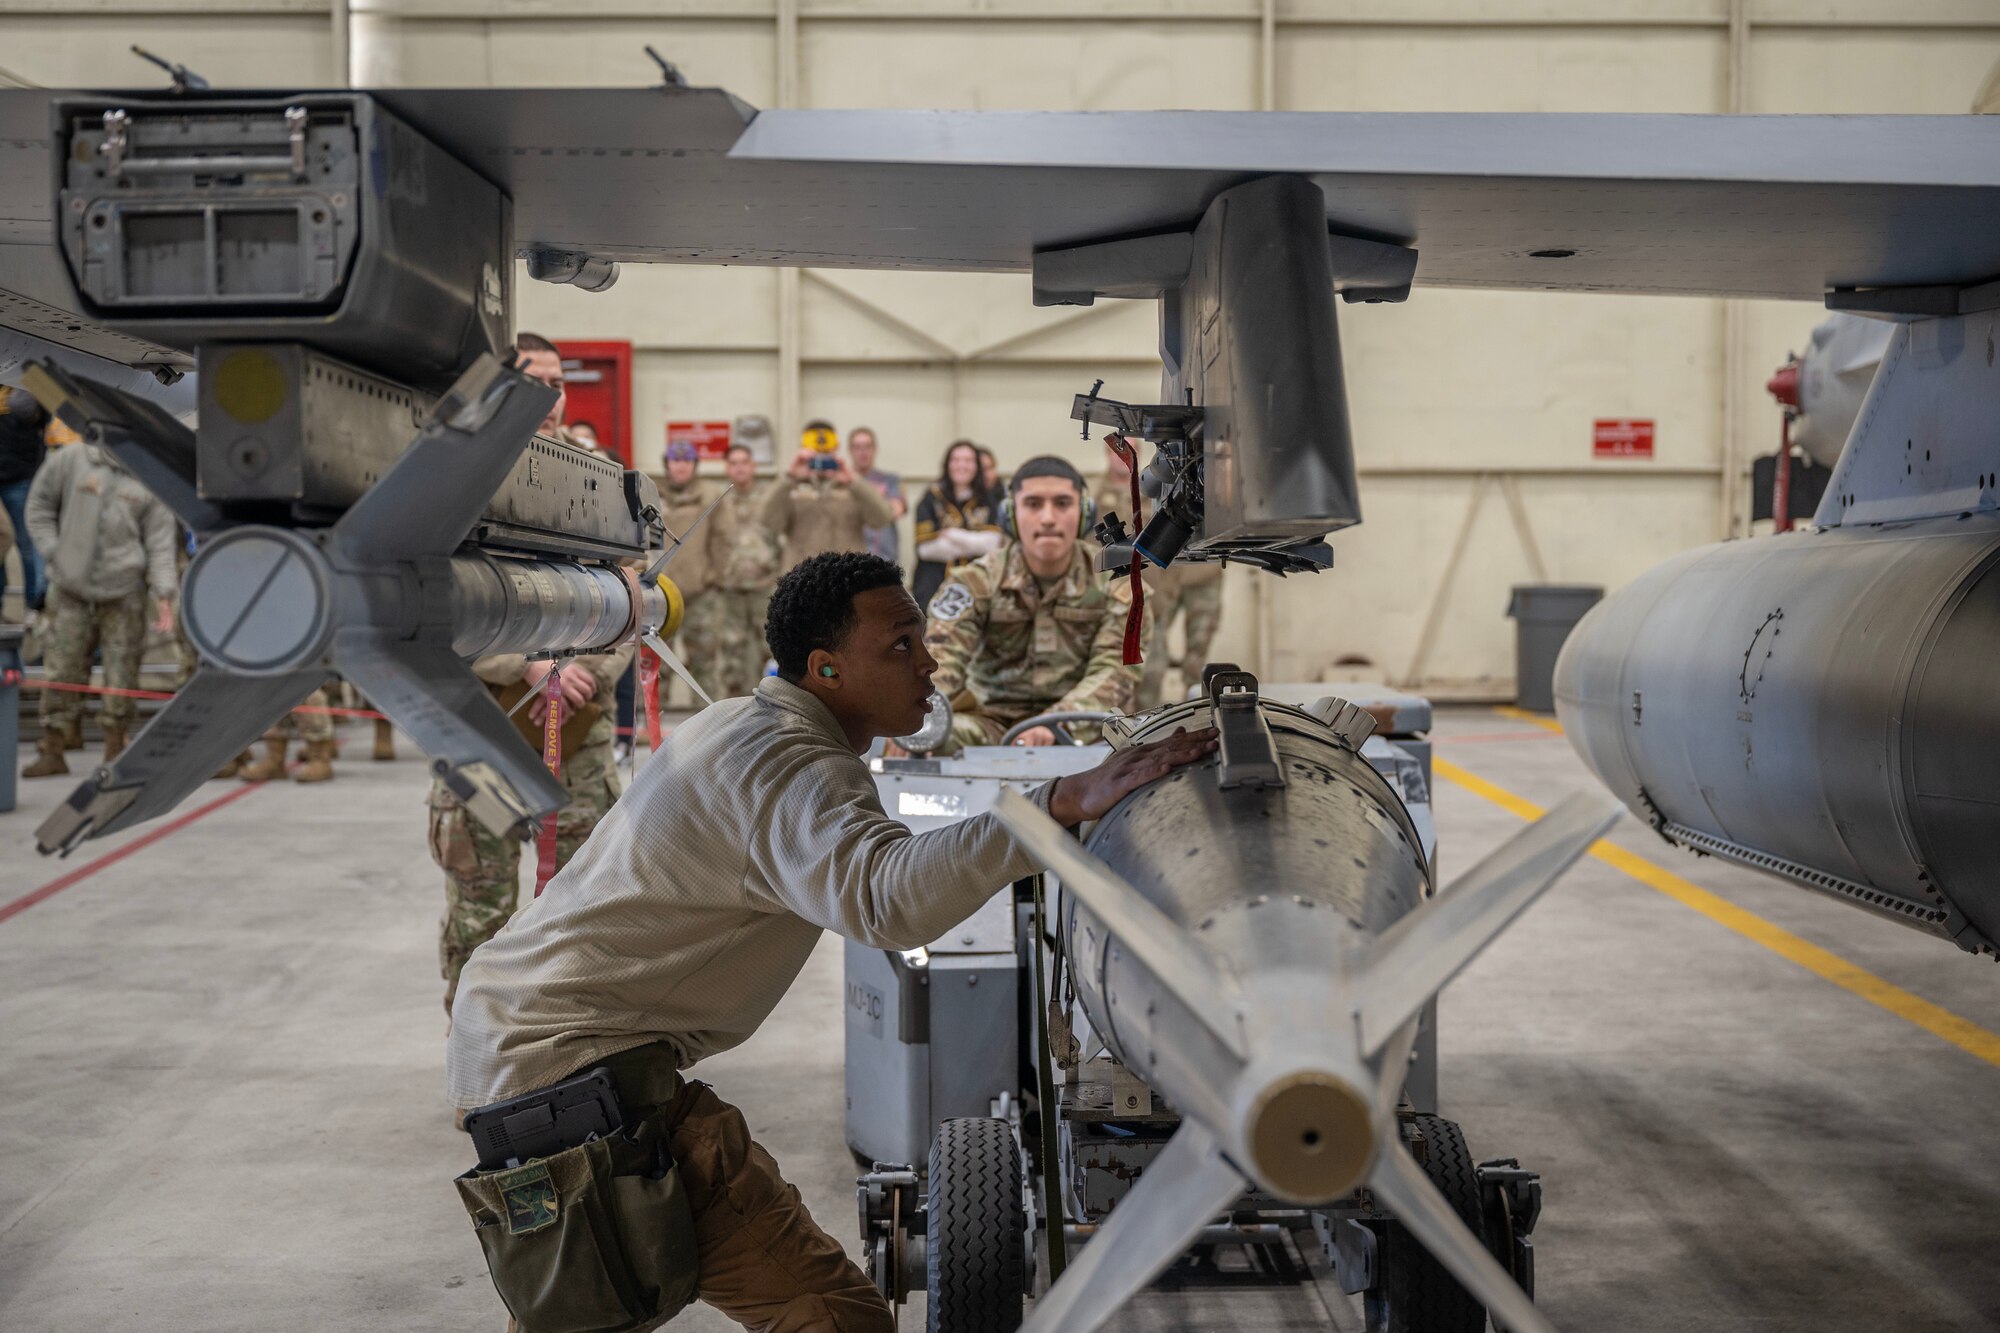 An Airman guides another Airman on installing and securing a guided bomb unit.